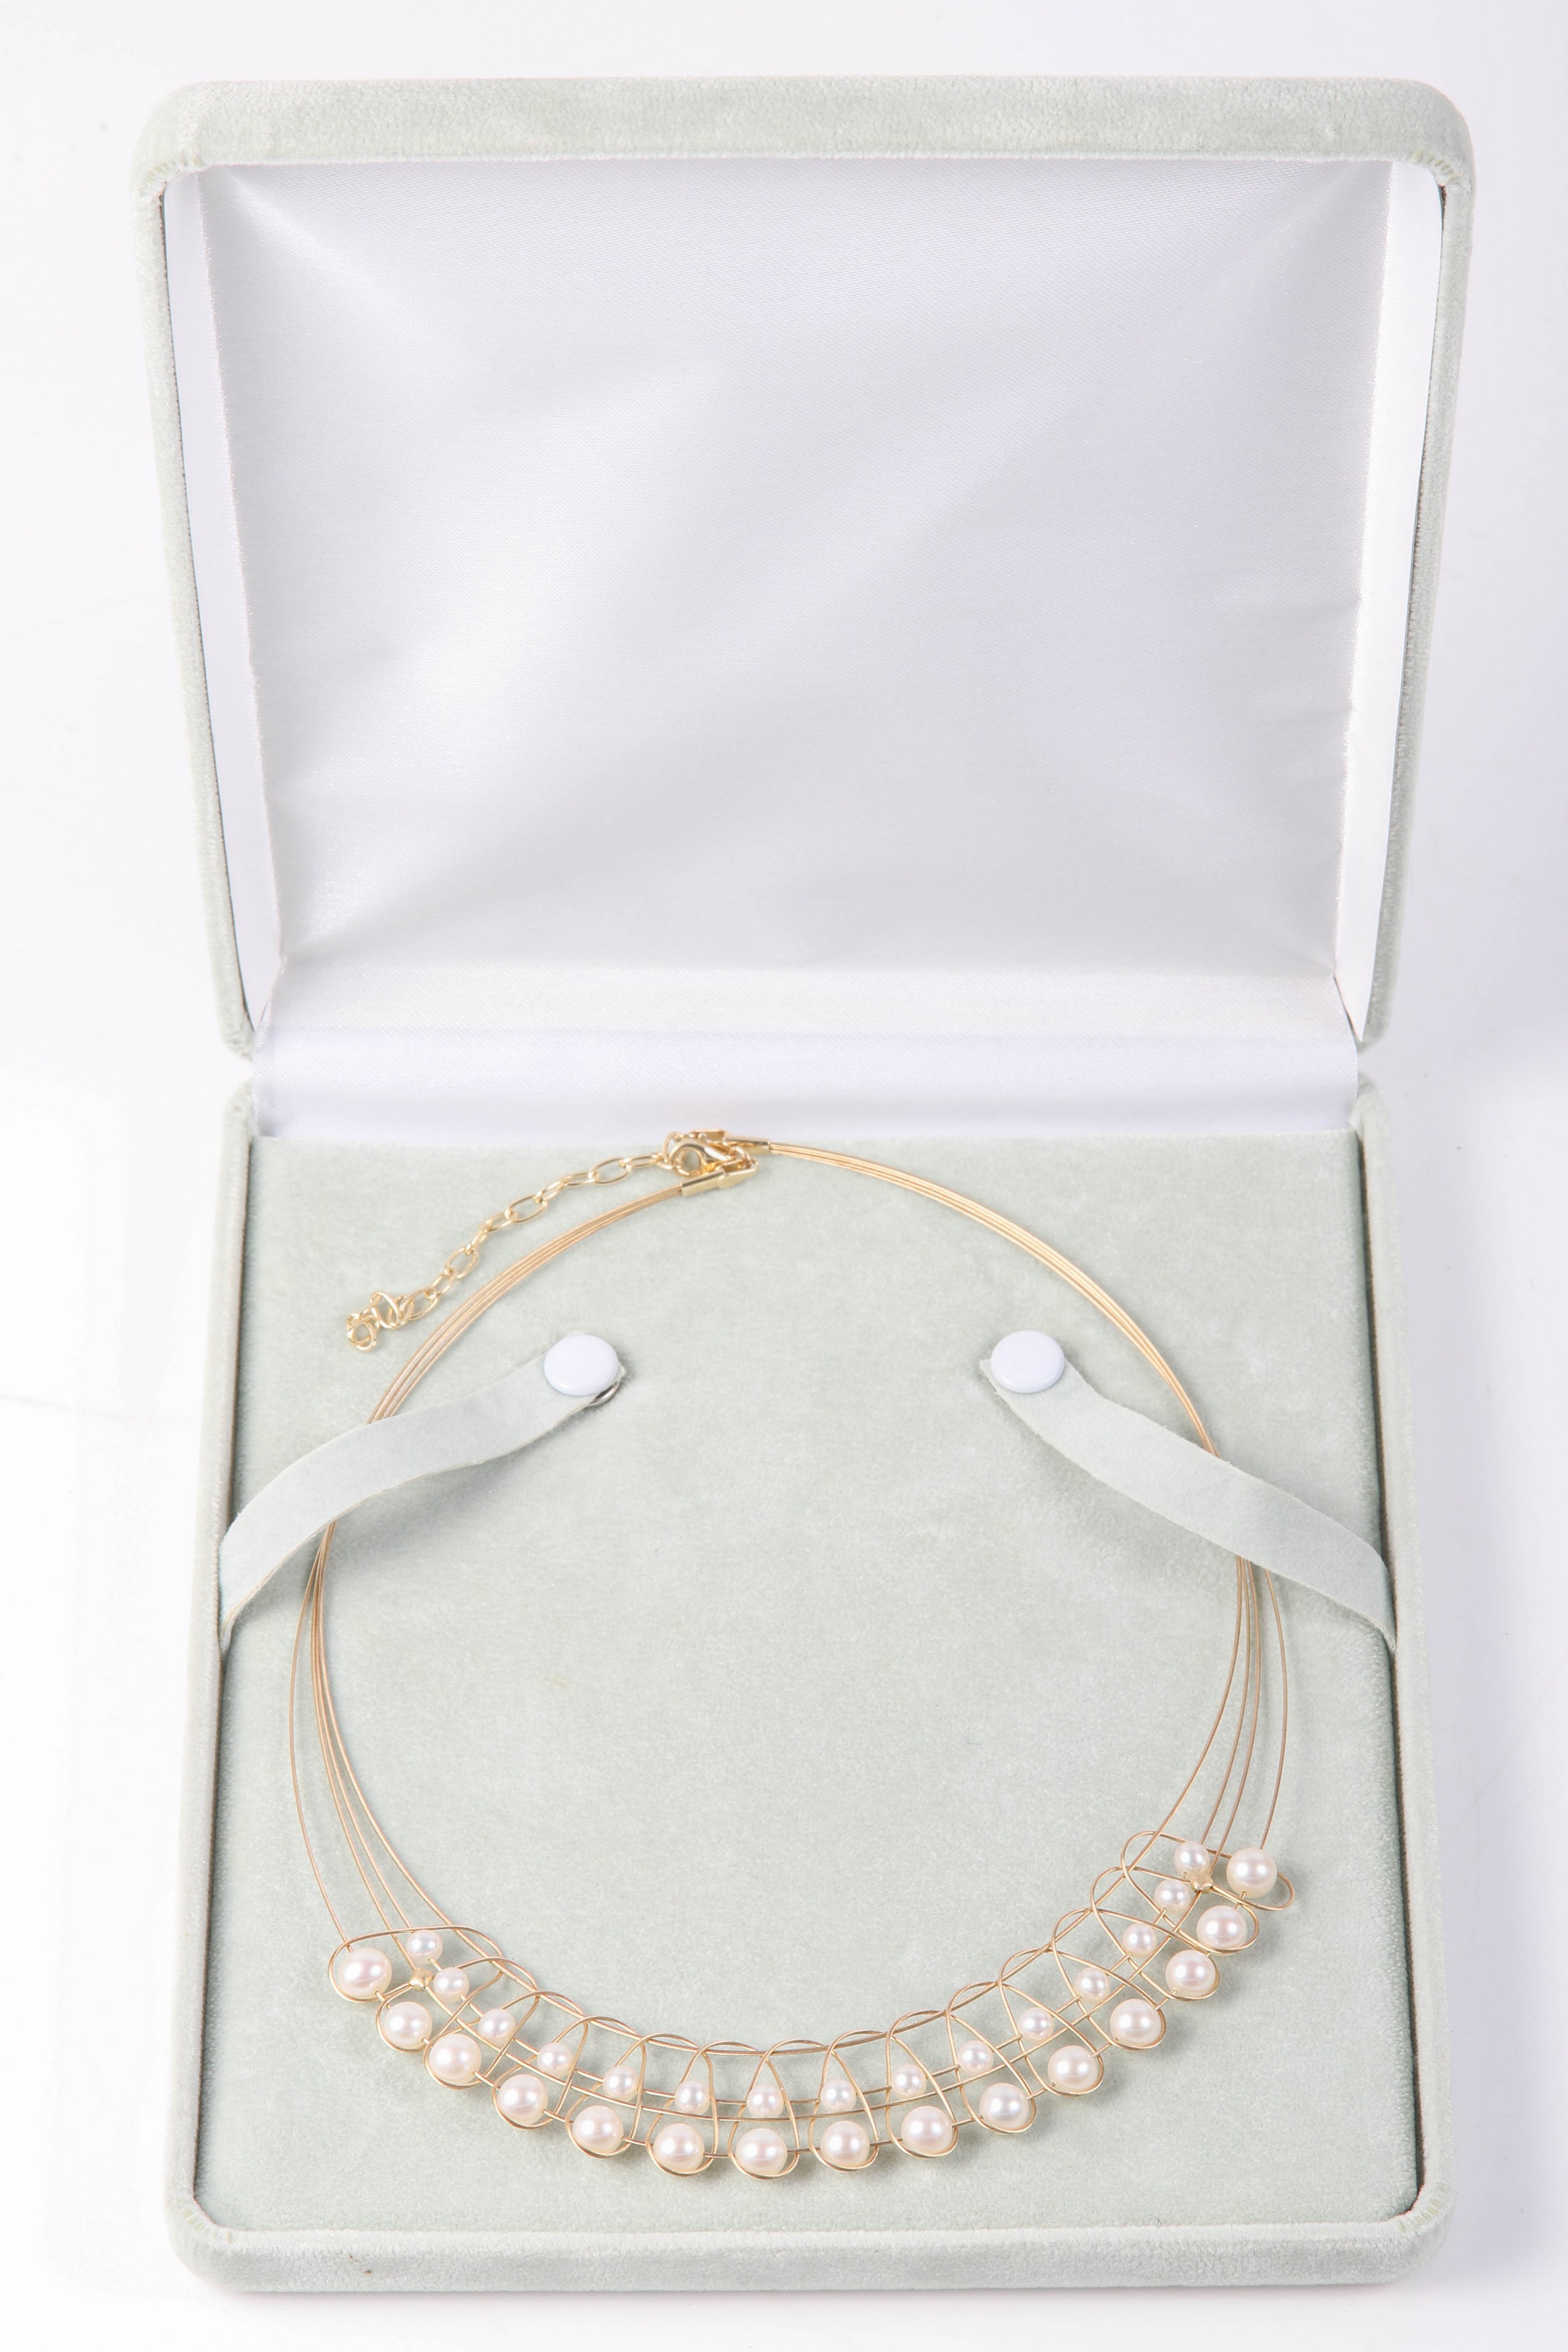 14K yellow gold and pearl necklace,